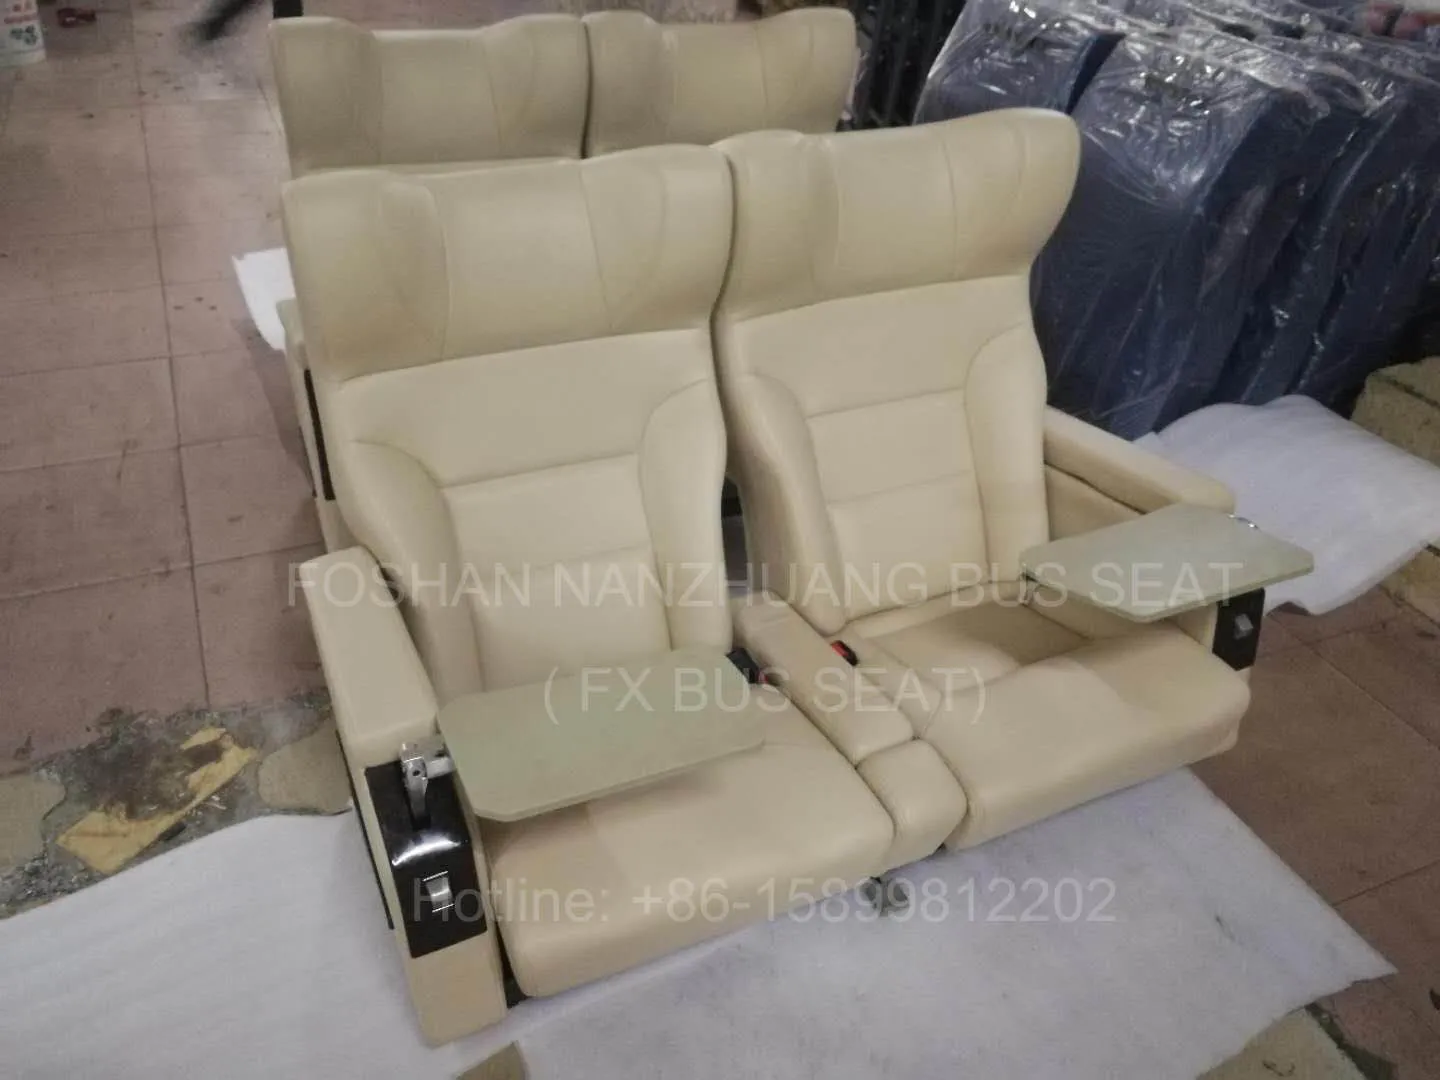 Luxury Vip Recliner Chairs For Buses - Buy Recliner Chairs,Luxury